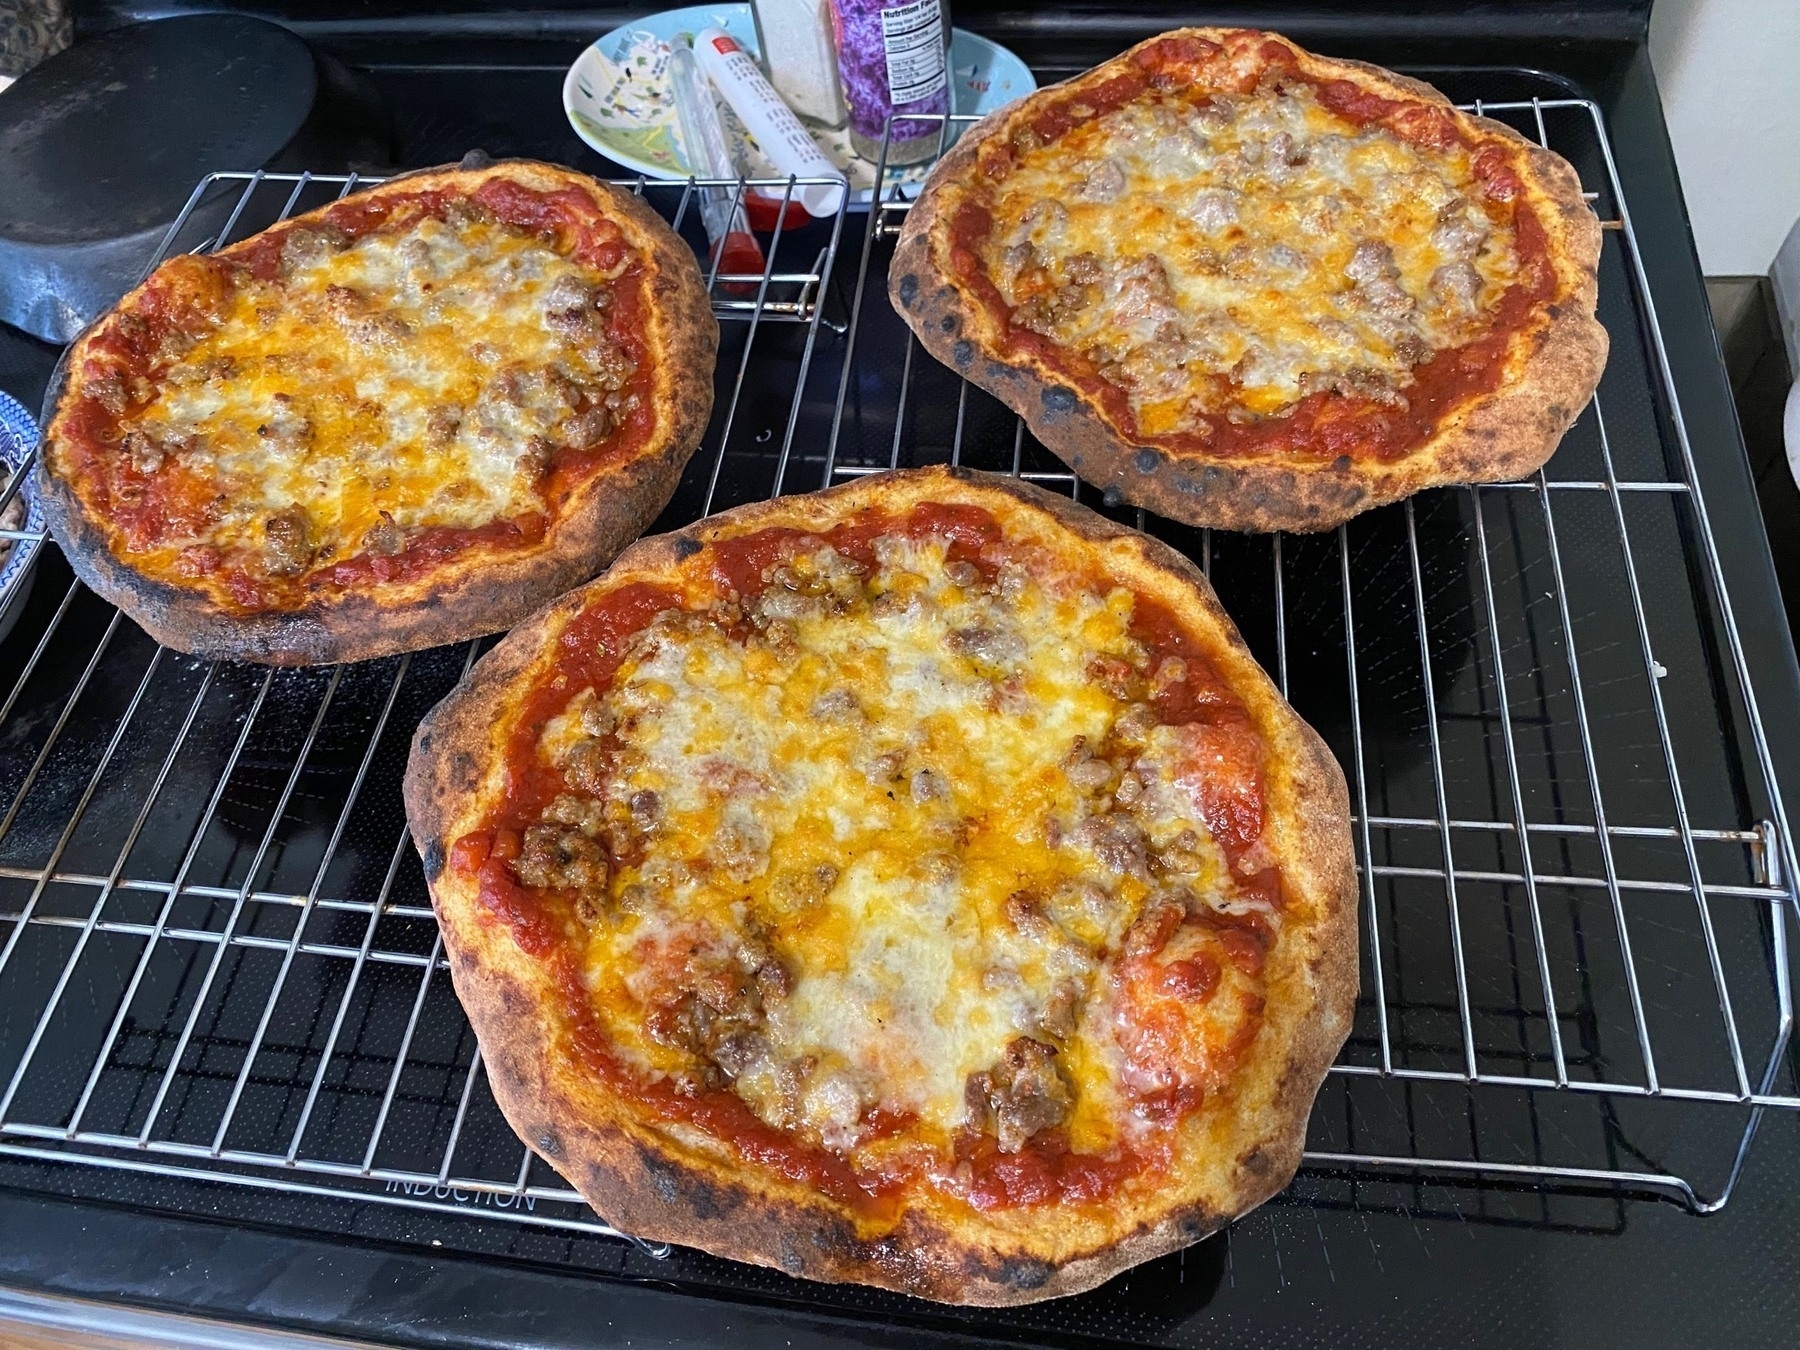 Three small pizzas on cooling racks.